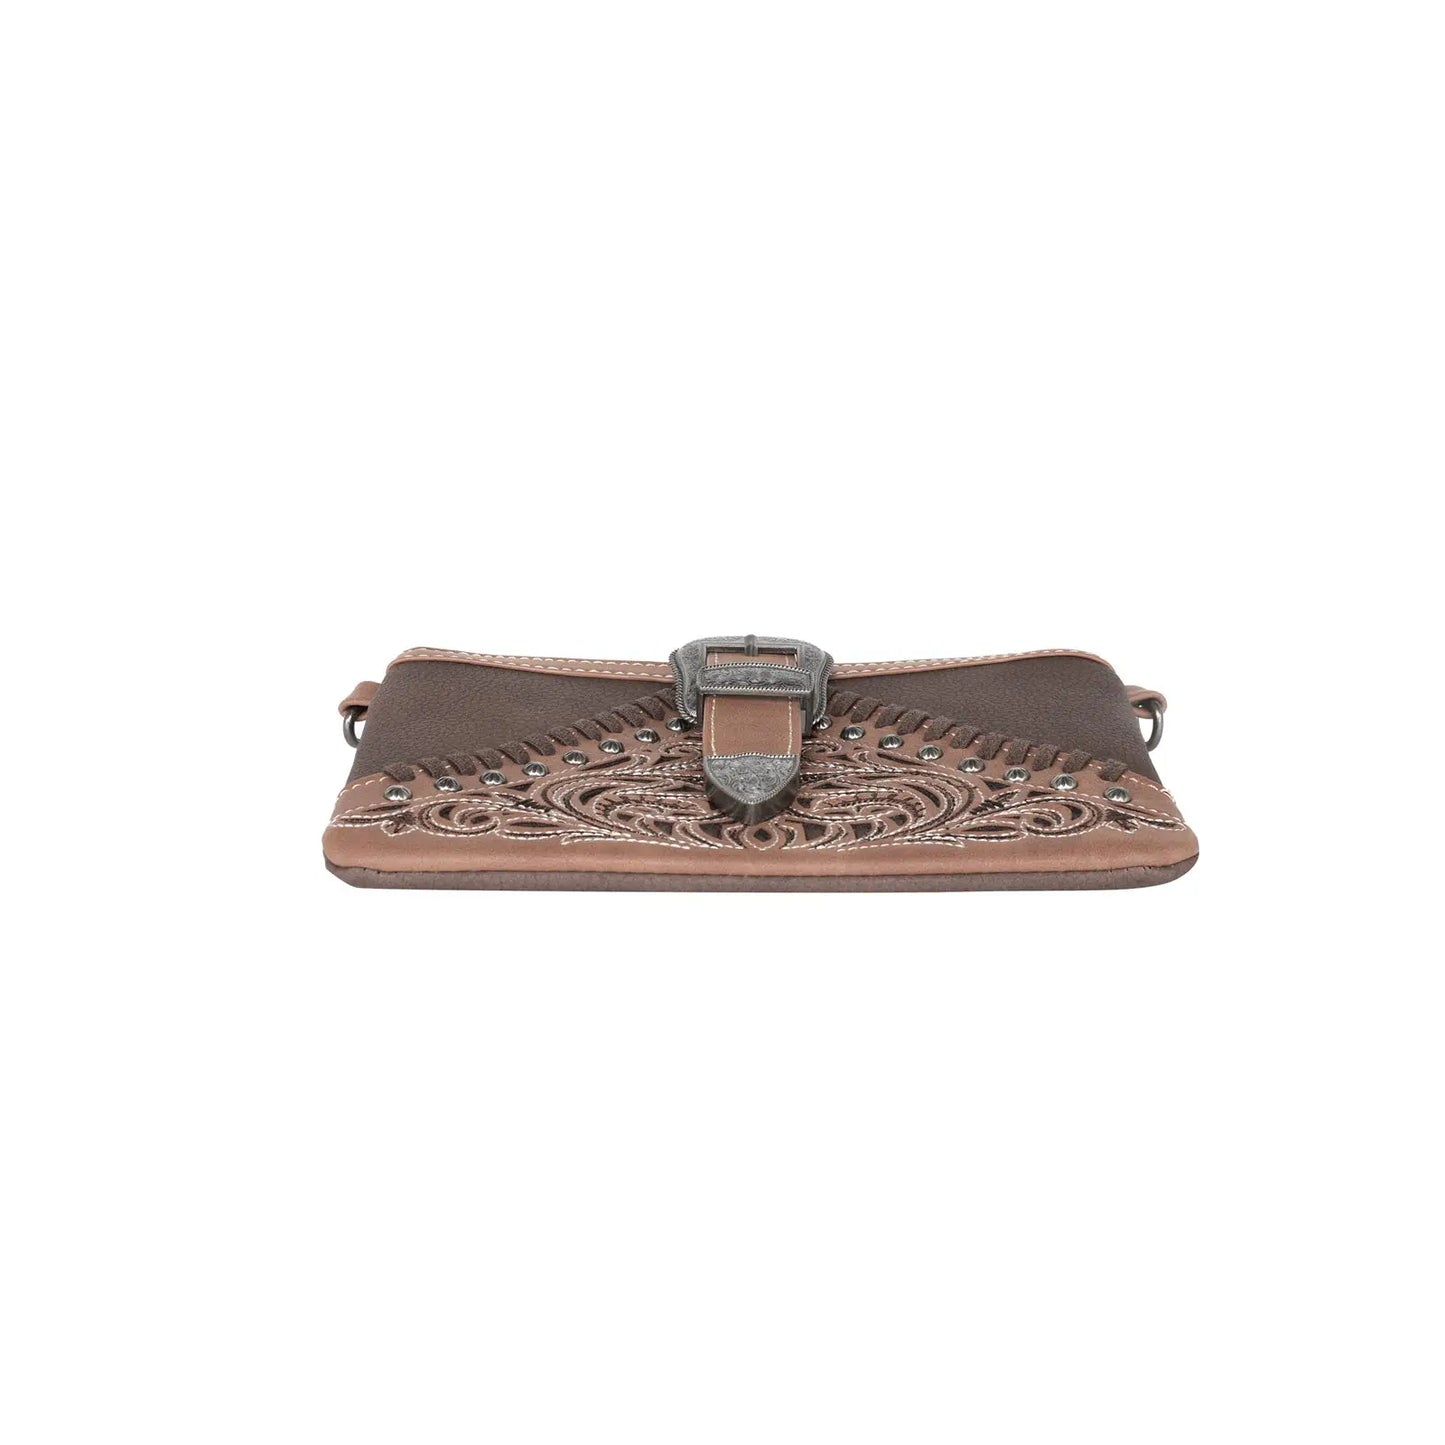 Montana West Floral Embroidered Buckle Collection Clutch/Crossbody